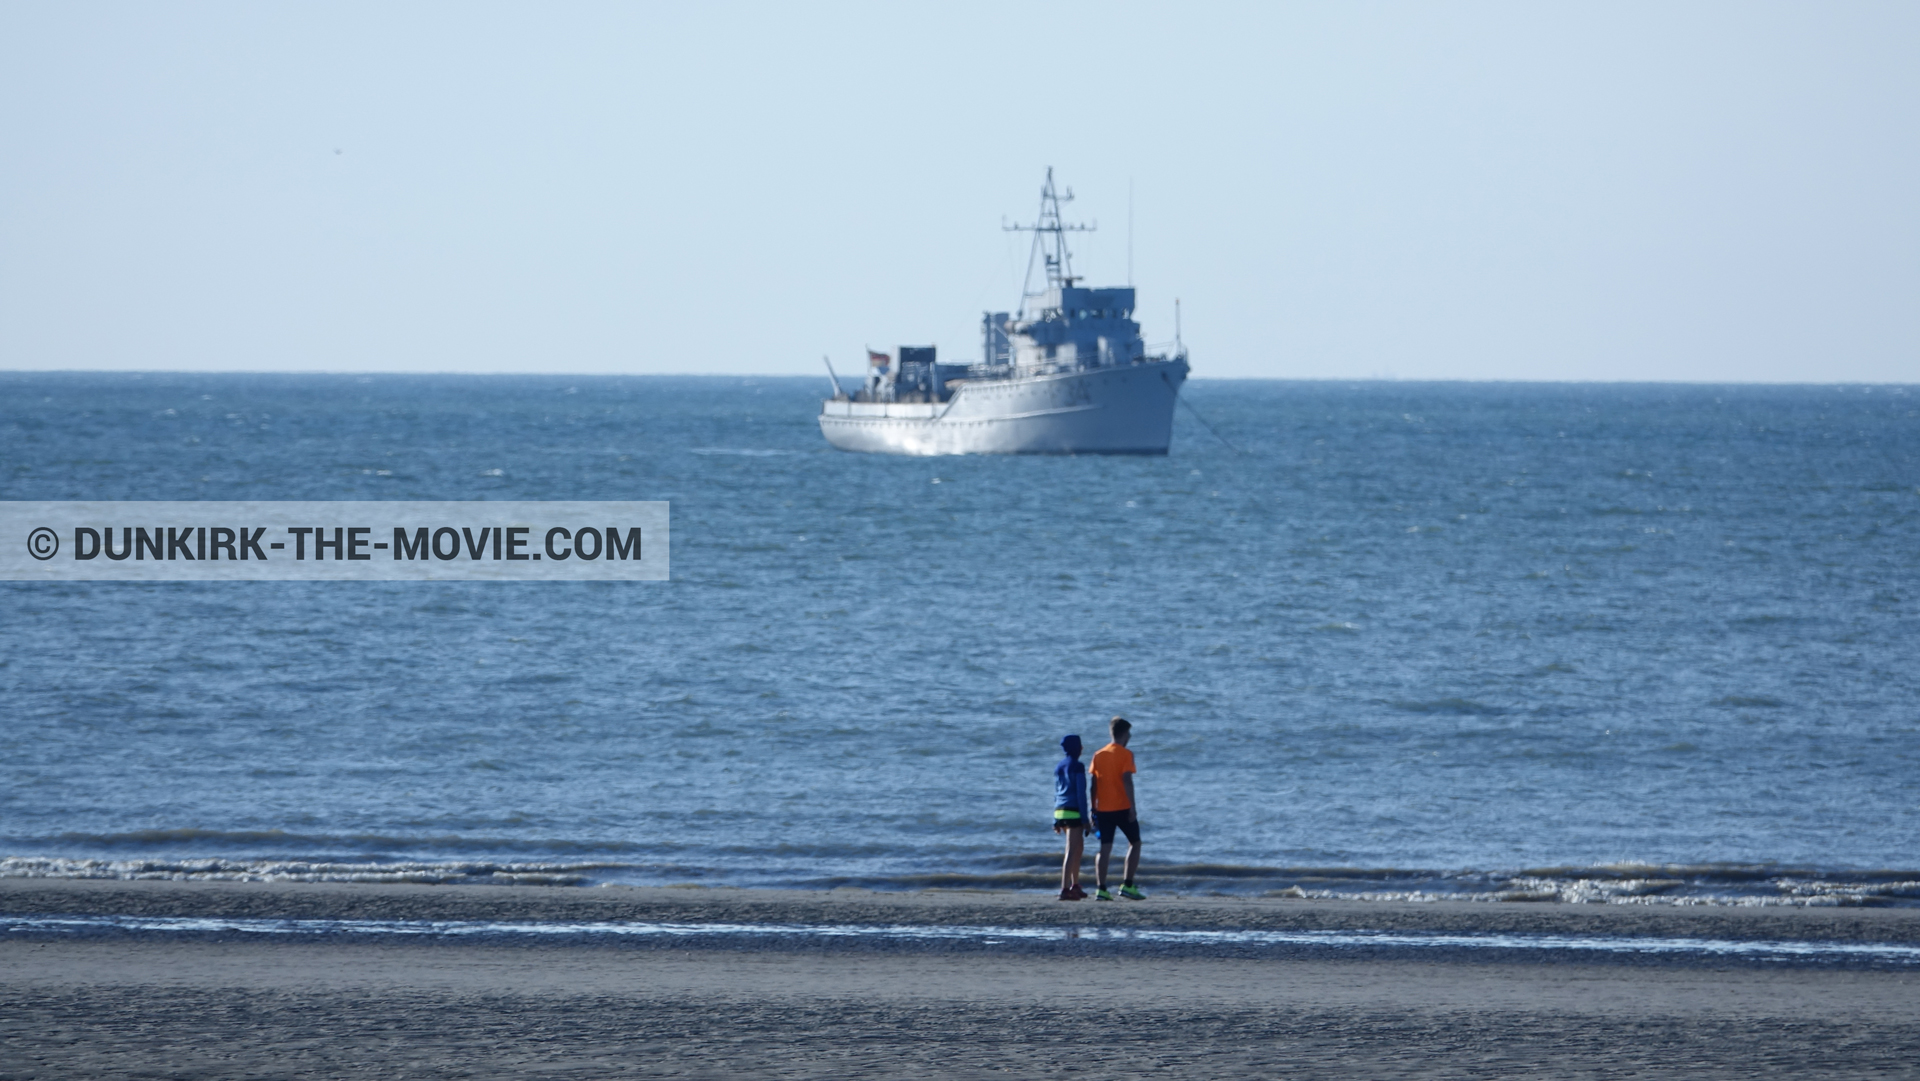 Picture with F34 - Hr.Ms. Sittard, beach,  from behind the scene of the Dunkirk movie by Nolan